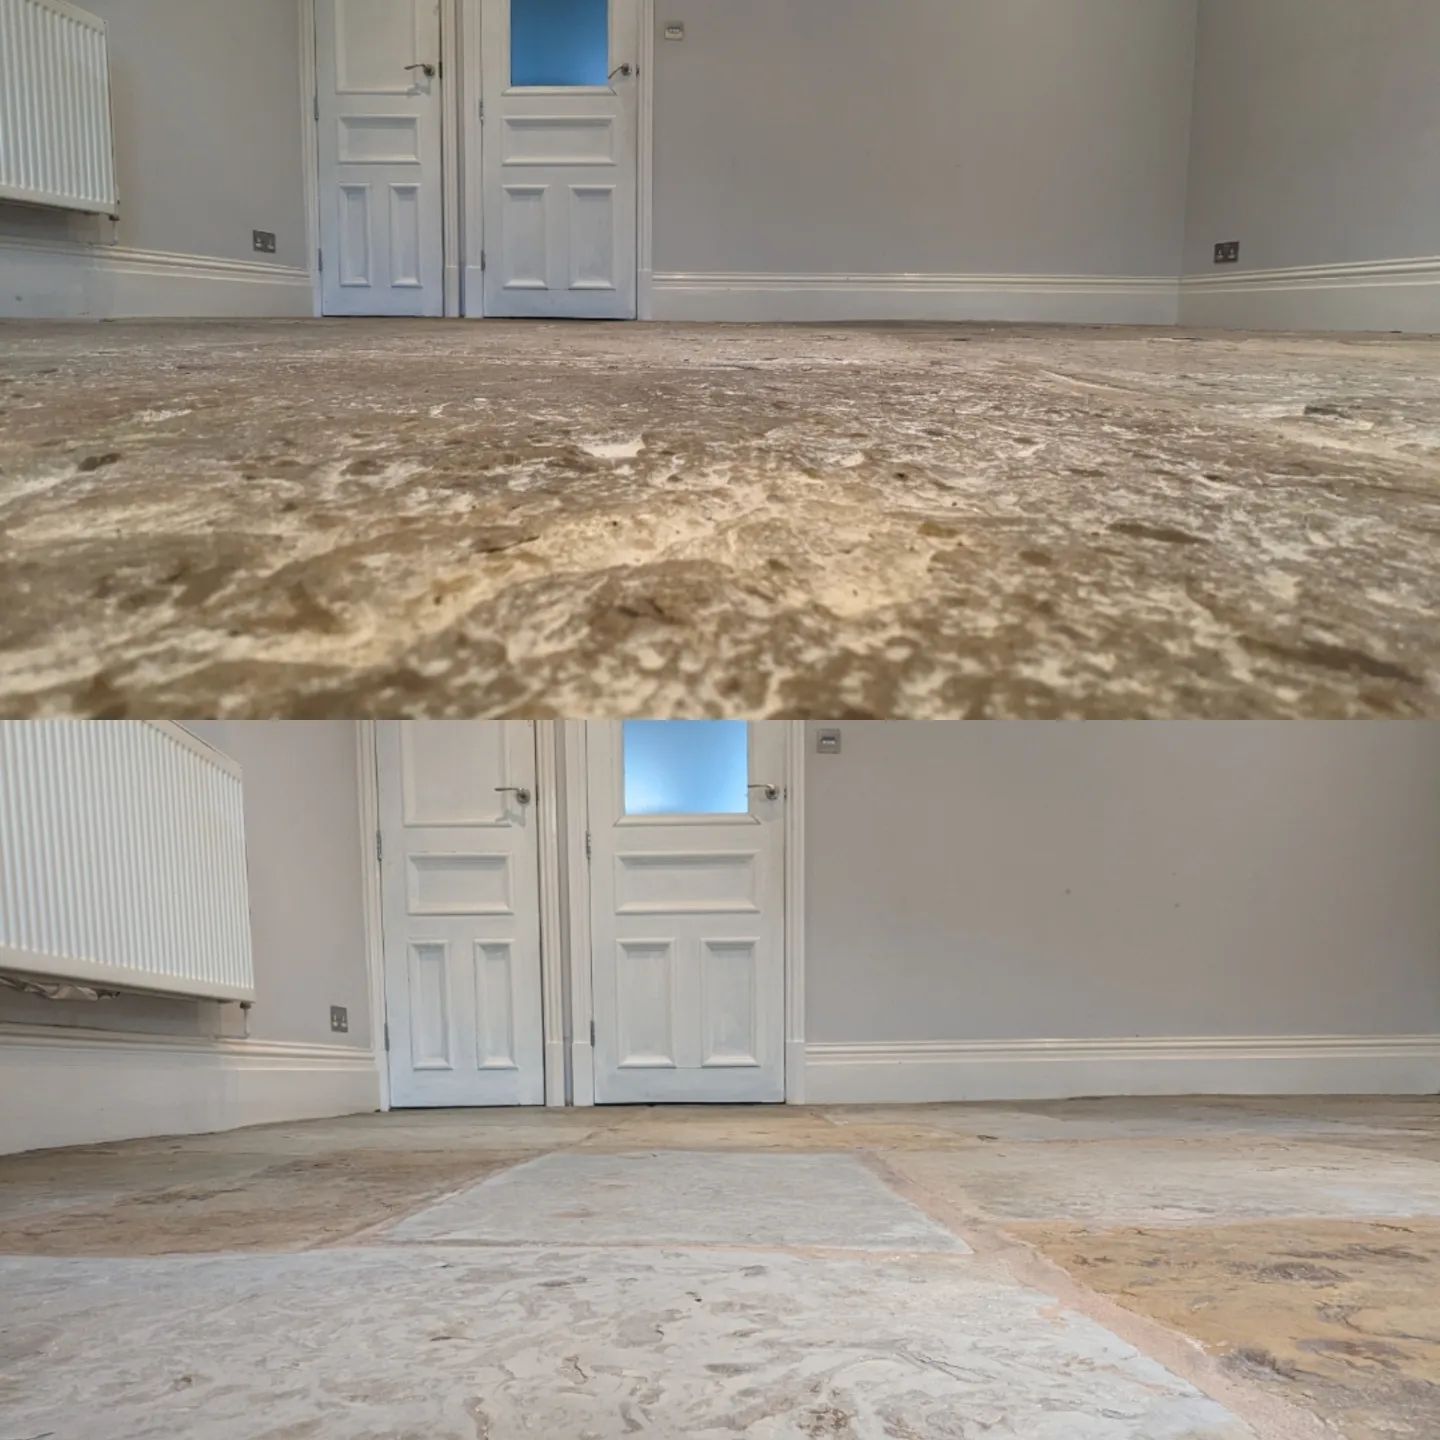 Deep cleaning, milling and sealing a flagstone floor in Bolton, Greater Manchester